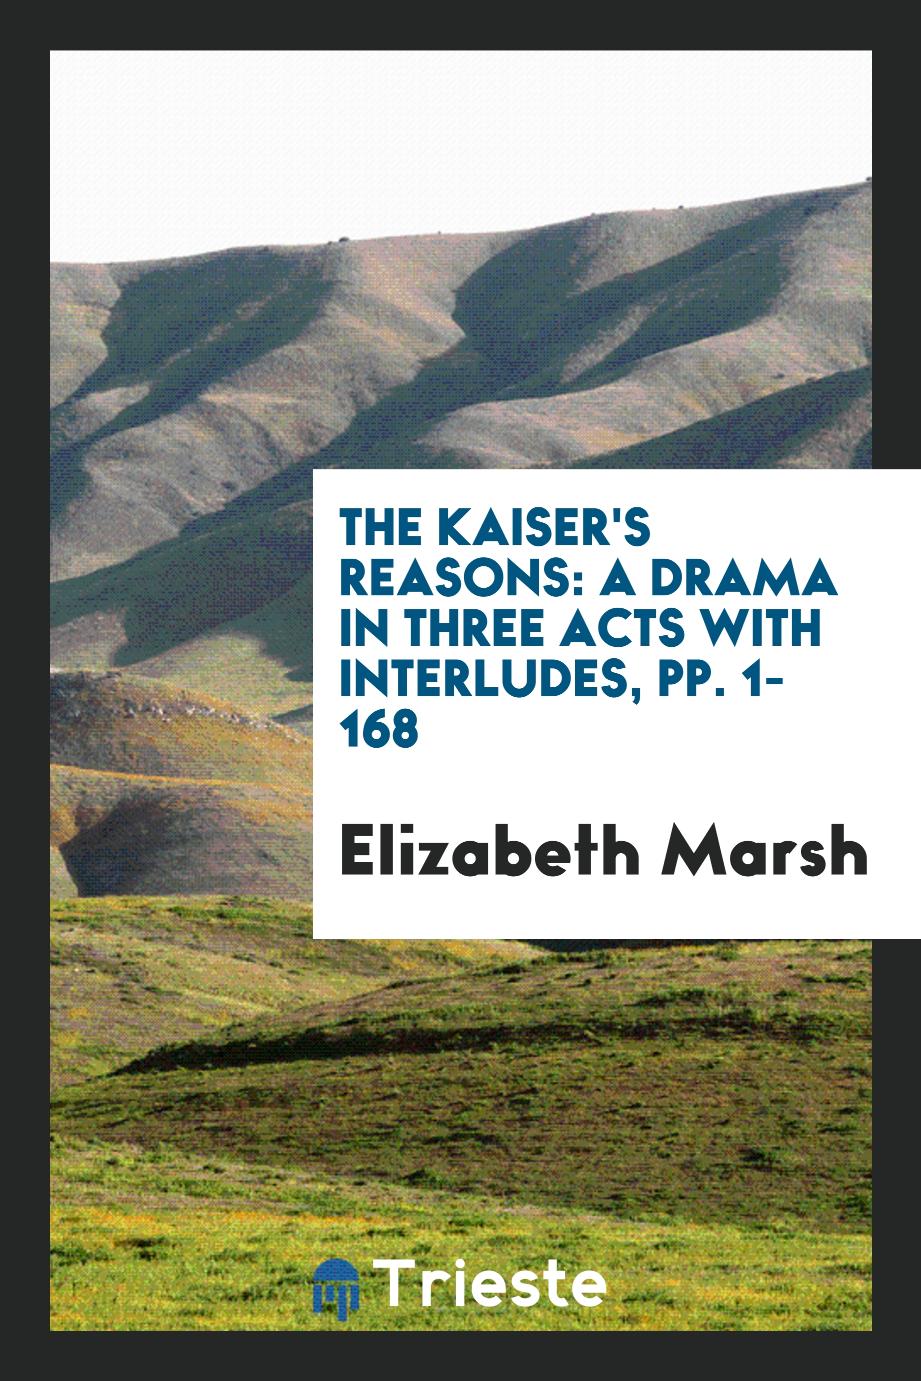 The Kaiser's Reasons: A Drama in Three Acts with Interludes, pp. 1-168